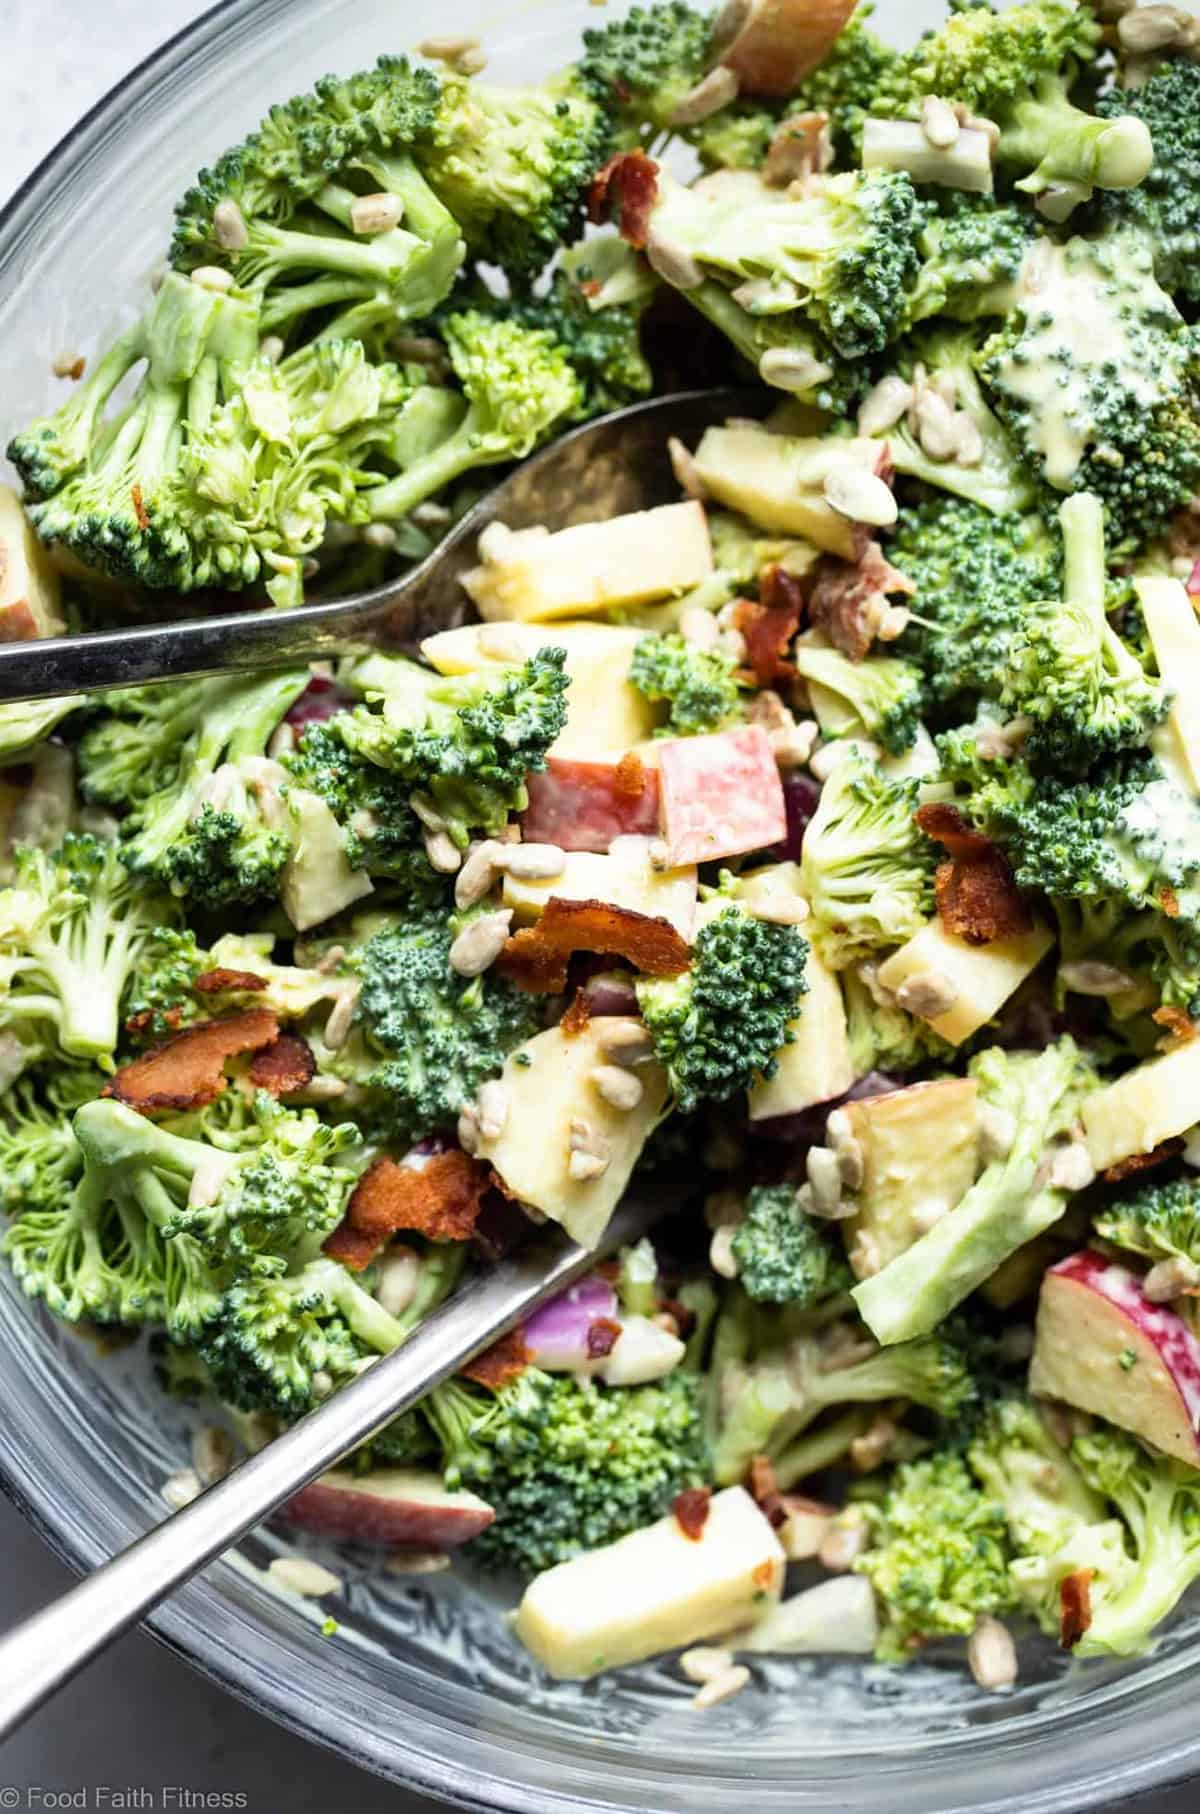 Honey Mustard Broccoli Apple Salad with Greek Yogurt  - An easy, gluten free and healthy side dish that even kids will like! It's protein packed and makes great leftovers! | #Foodfaithfitness | #Glutenfree #Grainfree #Healthy #GreekYogurt